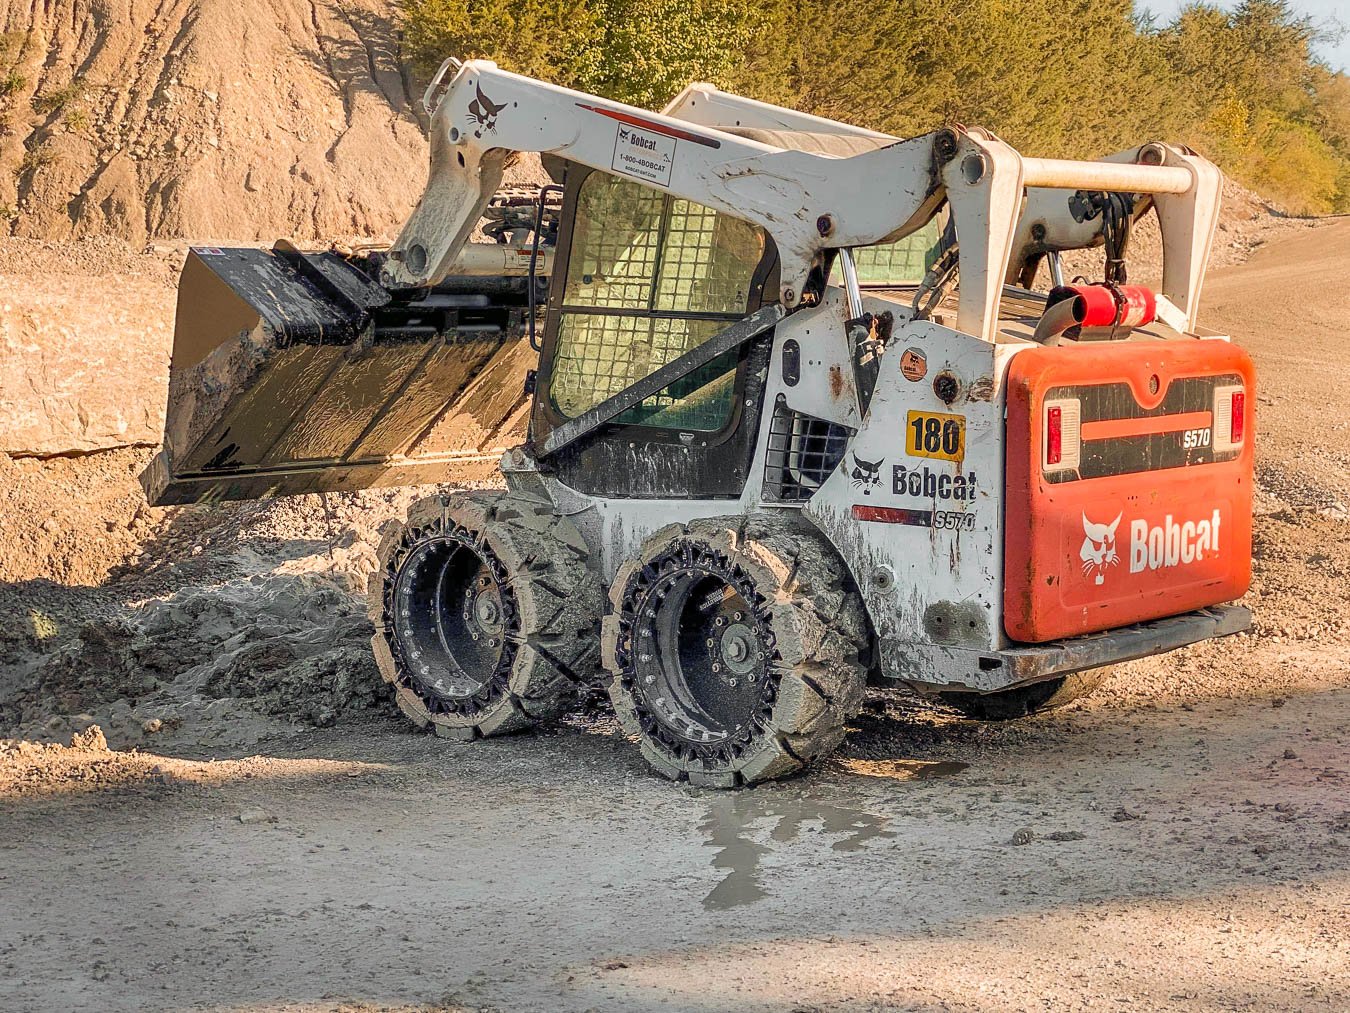 This image shows a BOBCAT S570 with our Airless Skid Steer Tires the EWRS-HS